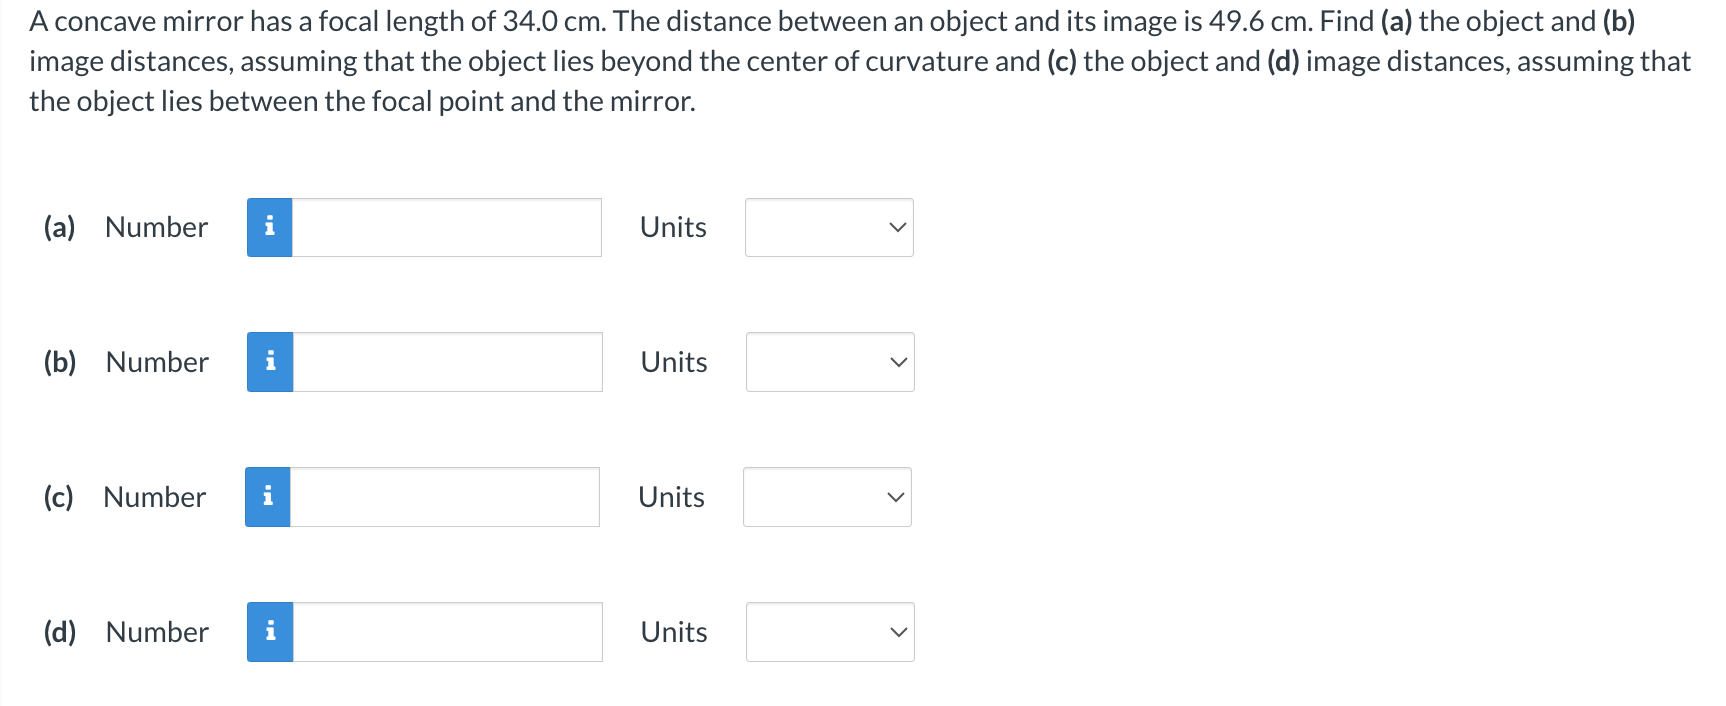 A concave mirror has a focal length of 34.0 cm. The distance between an object and its image is 49.6 cm. Find (a) the object and (b) image distances, assuming that the object lies beyond the center of curvature and (c) the object and (d) image distances, assuming that the object lies between the focal point and the mirror. (a) Number Units (b) Number Units (c) Number Units (d) Number Units